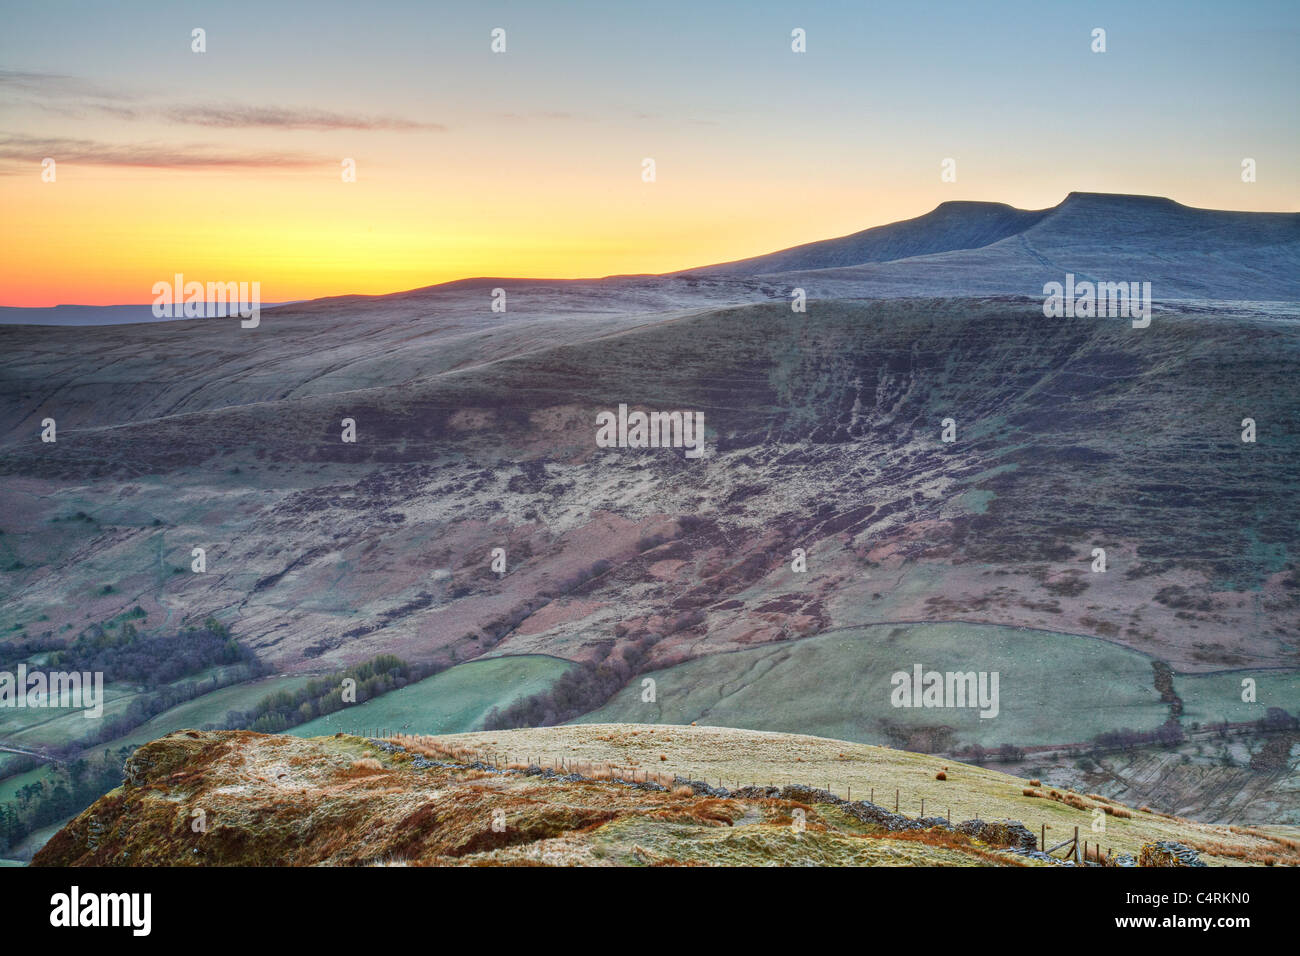 Craig Du High Resolution Stock Photography and Images - Alamy